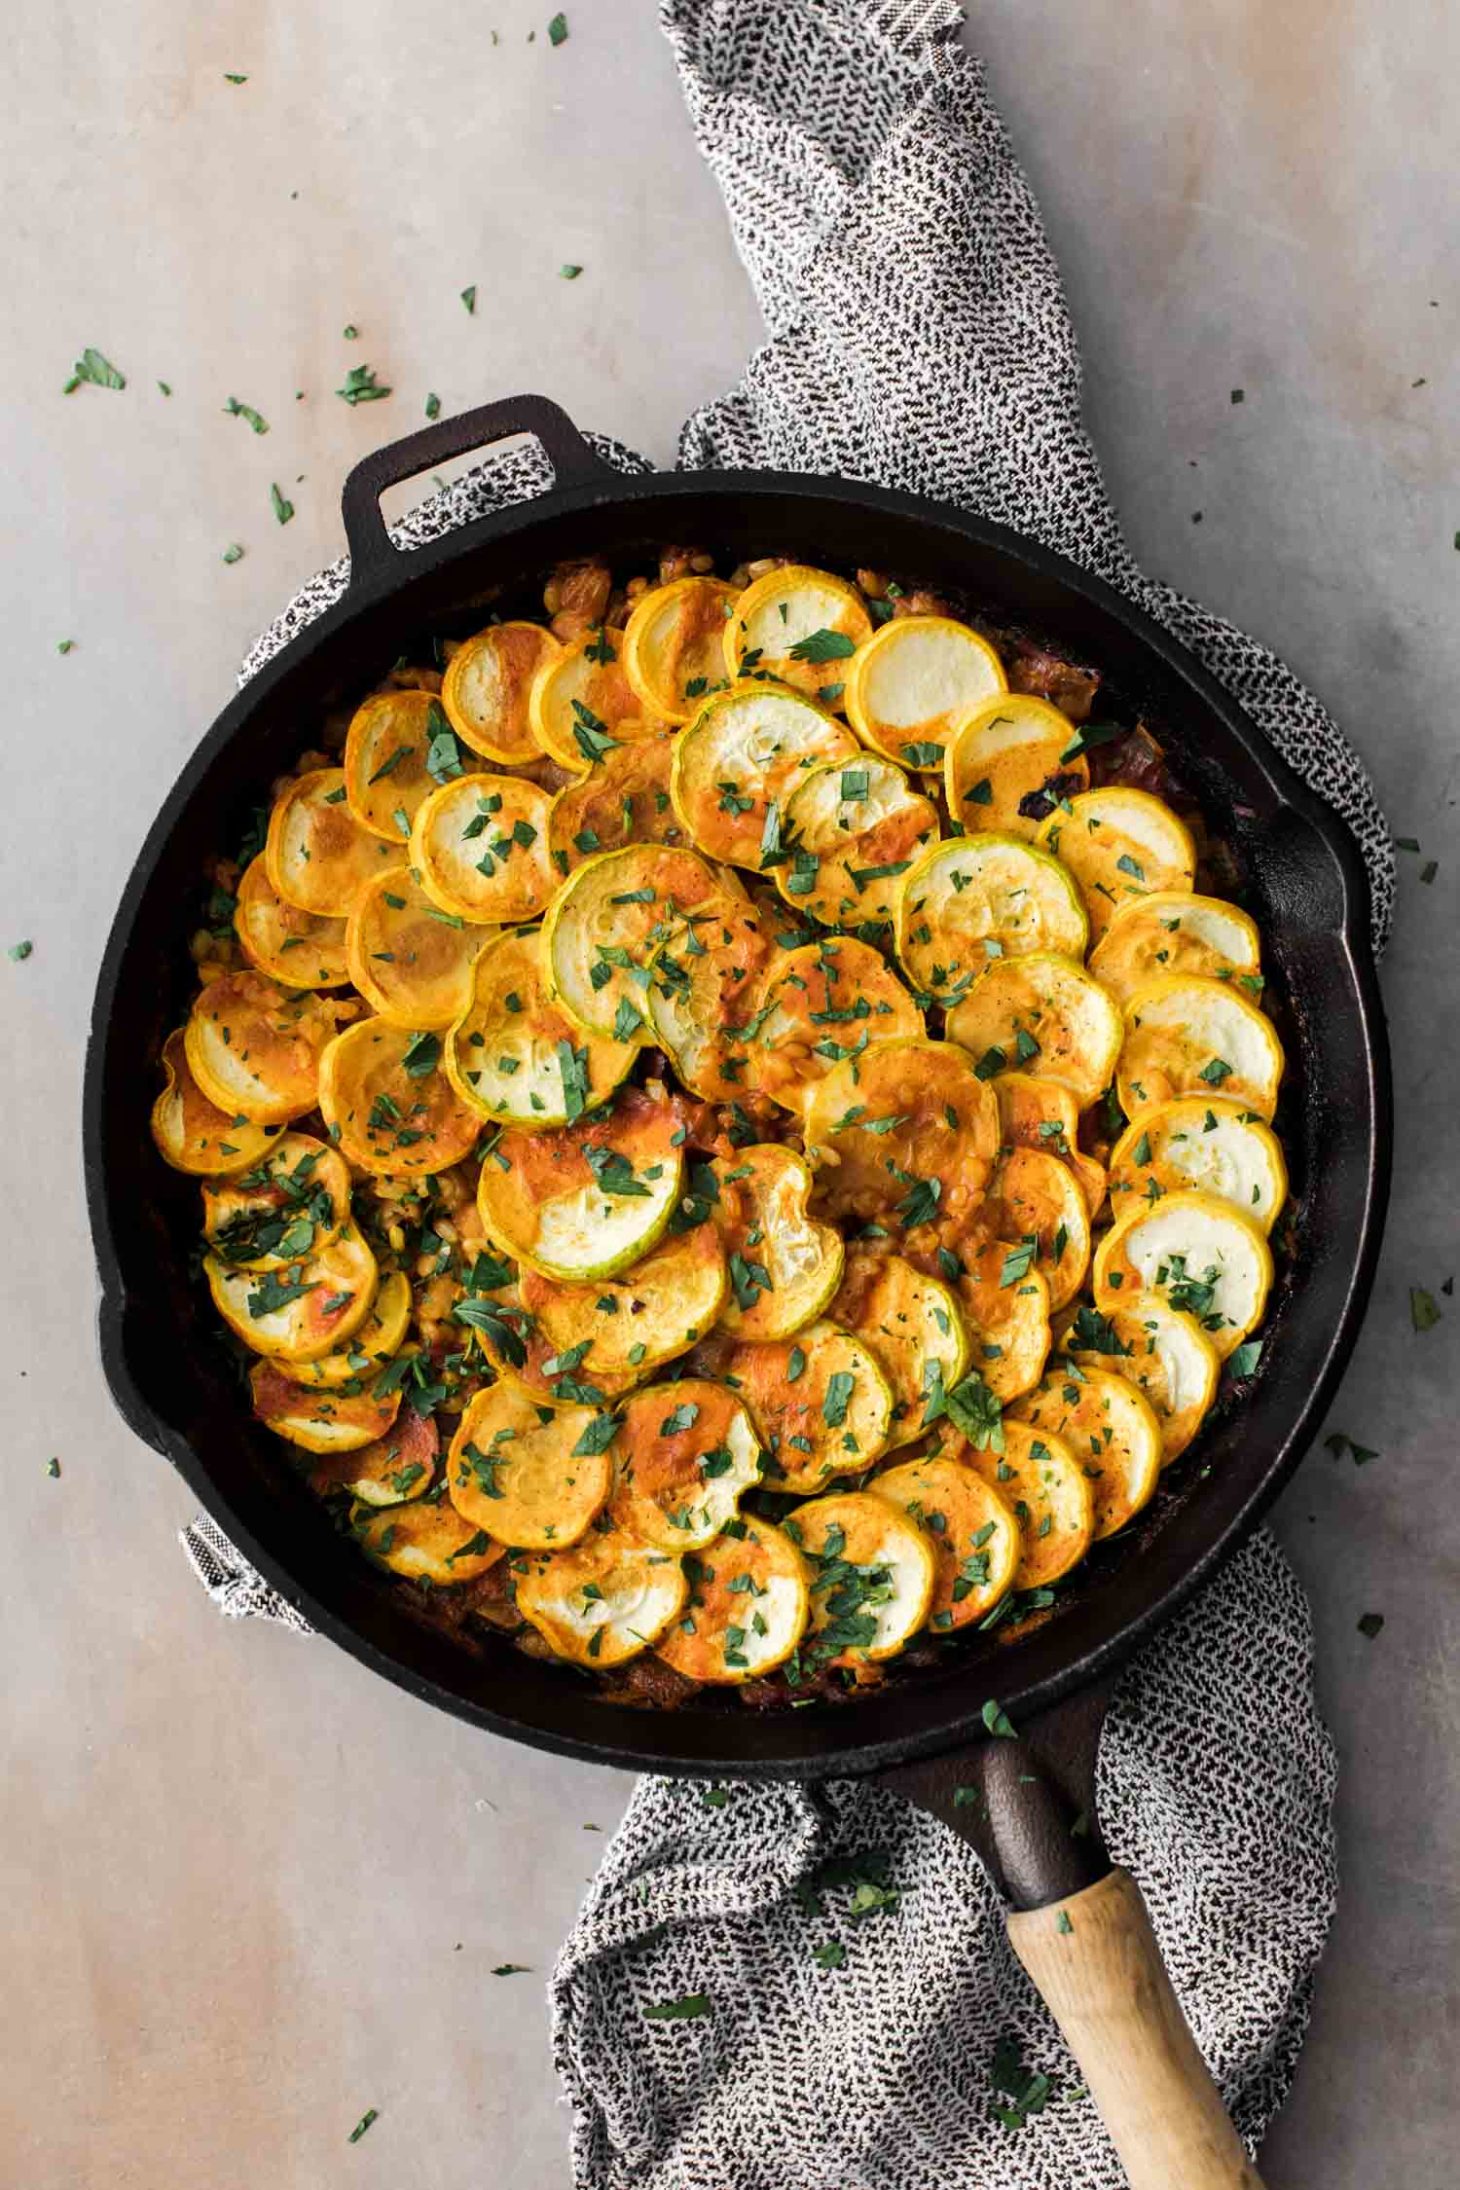 Overhead shot of a cast iron skillet with paella layered with summer squash